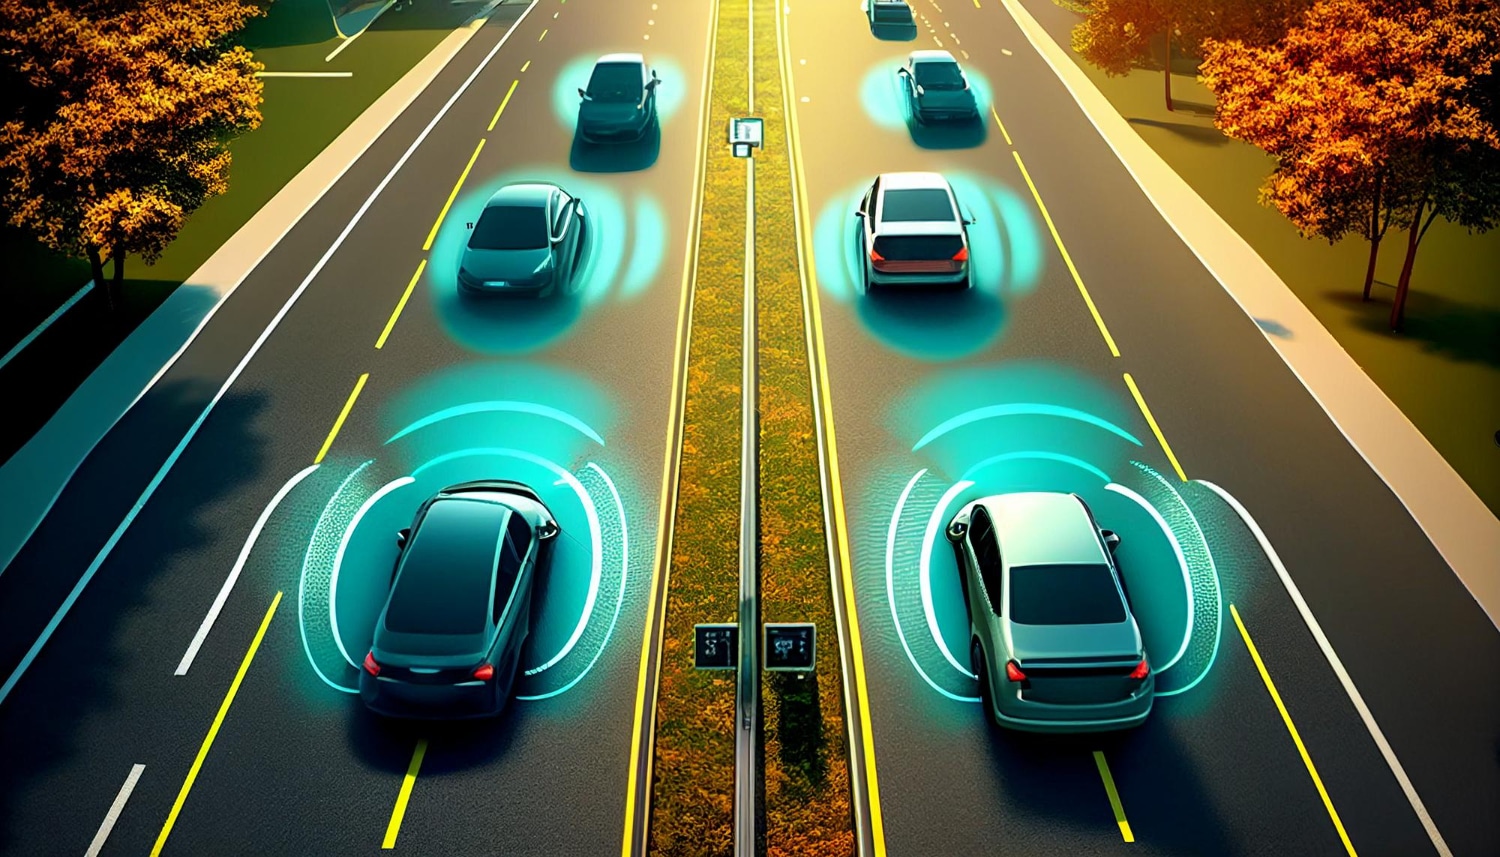 Automotive radar systems can be easily fooled, warns engineers thumbnail